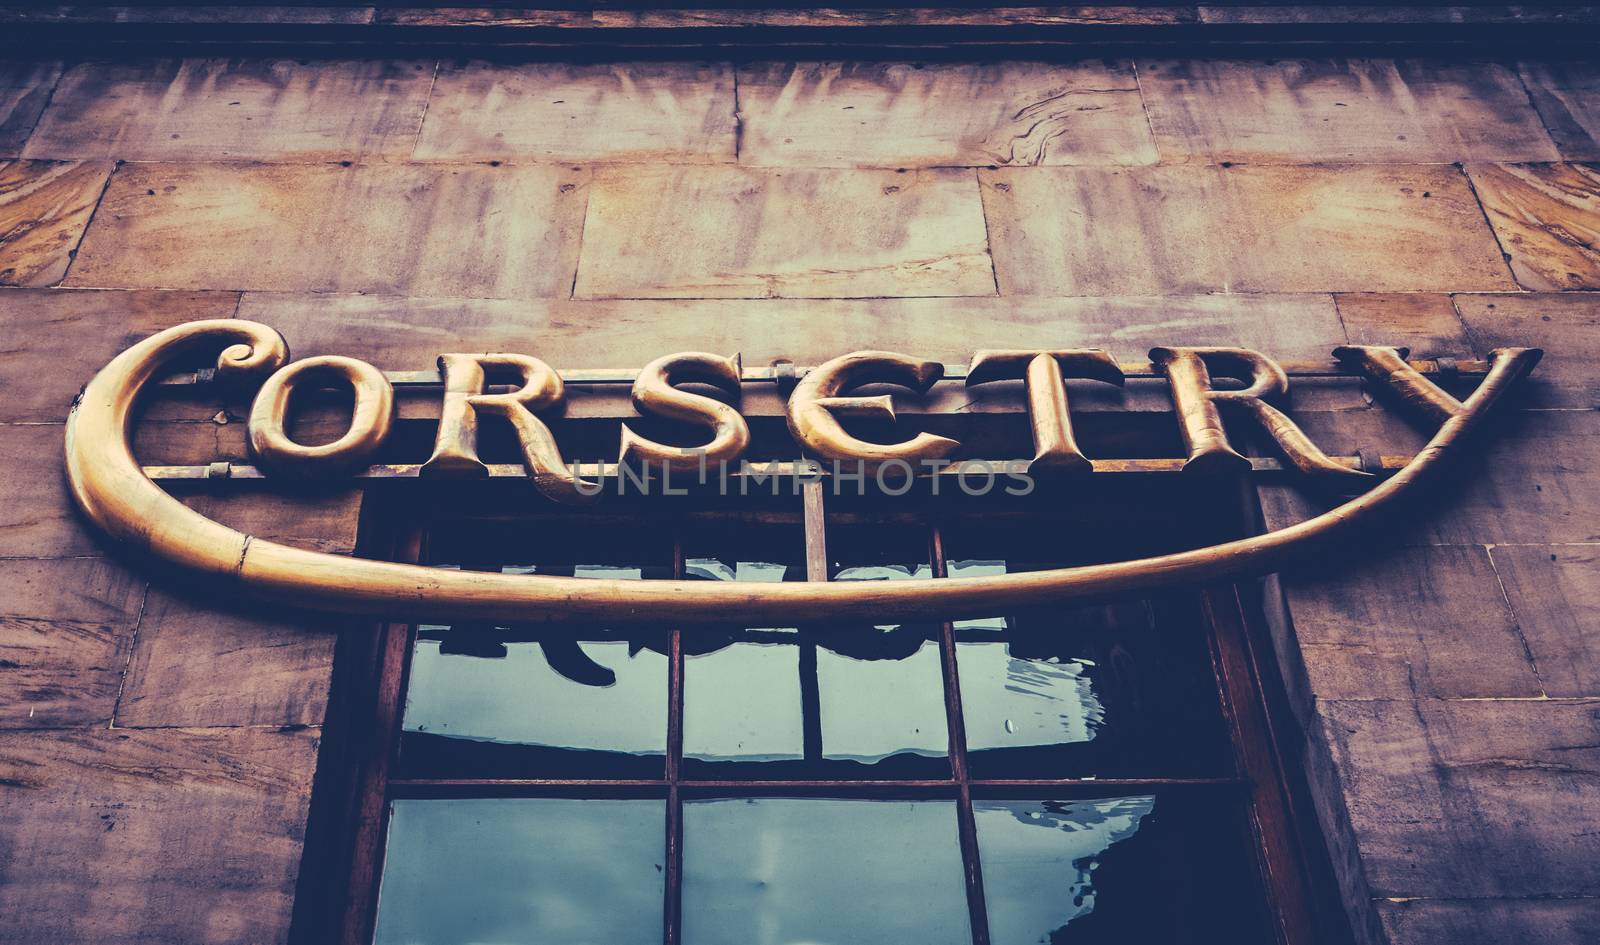 Vintage Corsetry Store Sign by mrdoomits